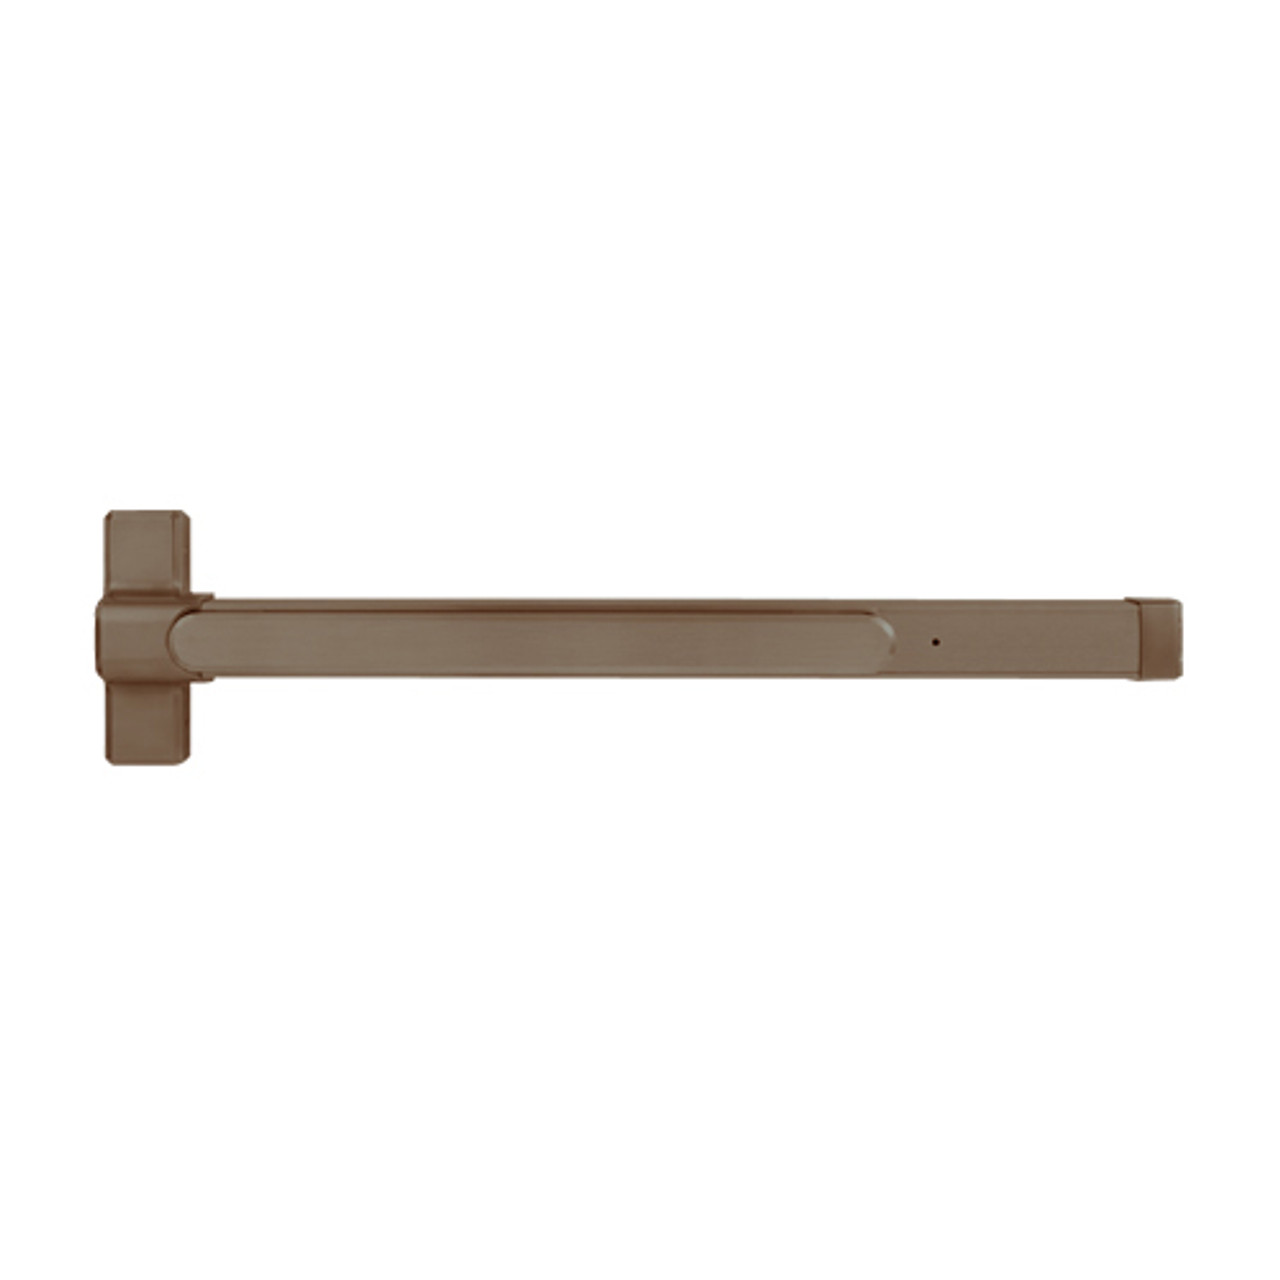 QED127LR-48-7-313AN Stanley QED100 Series Heavy Duty Concealed Vertical Rod Hex Dog Exit Device in Anodized Duranodic Bronze Finish